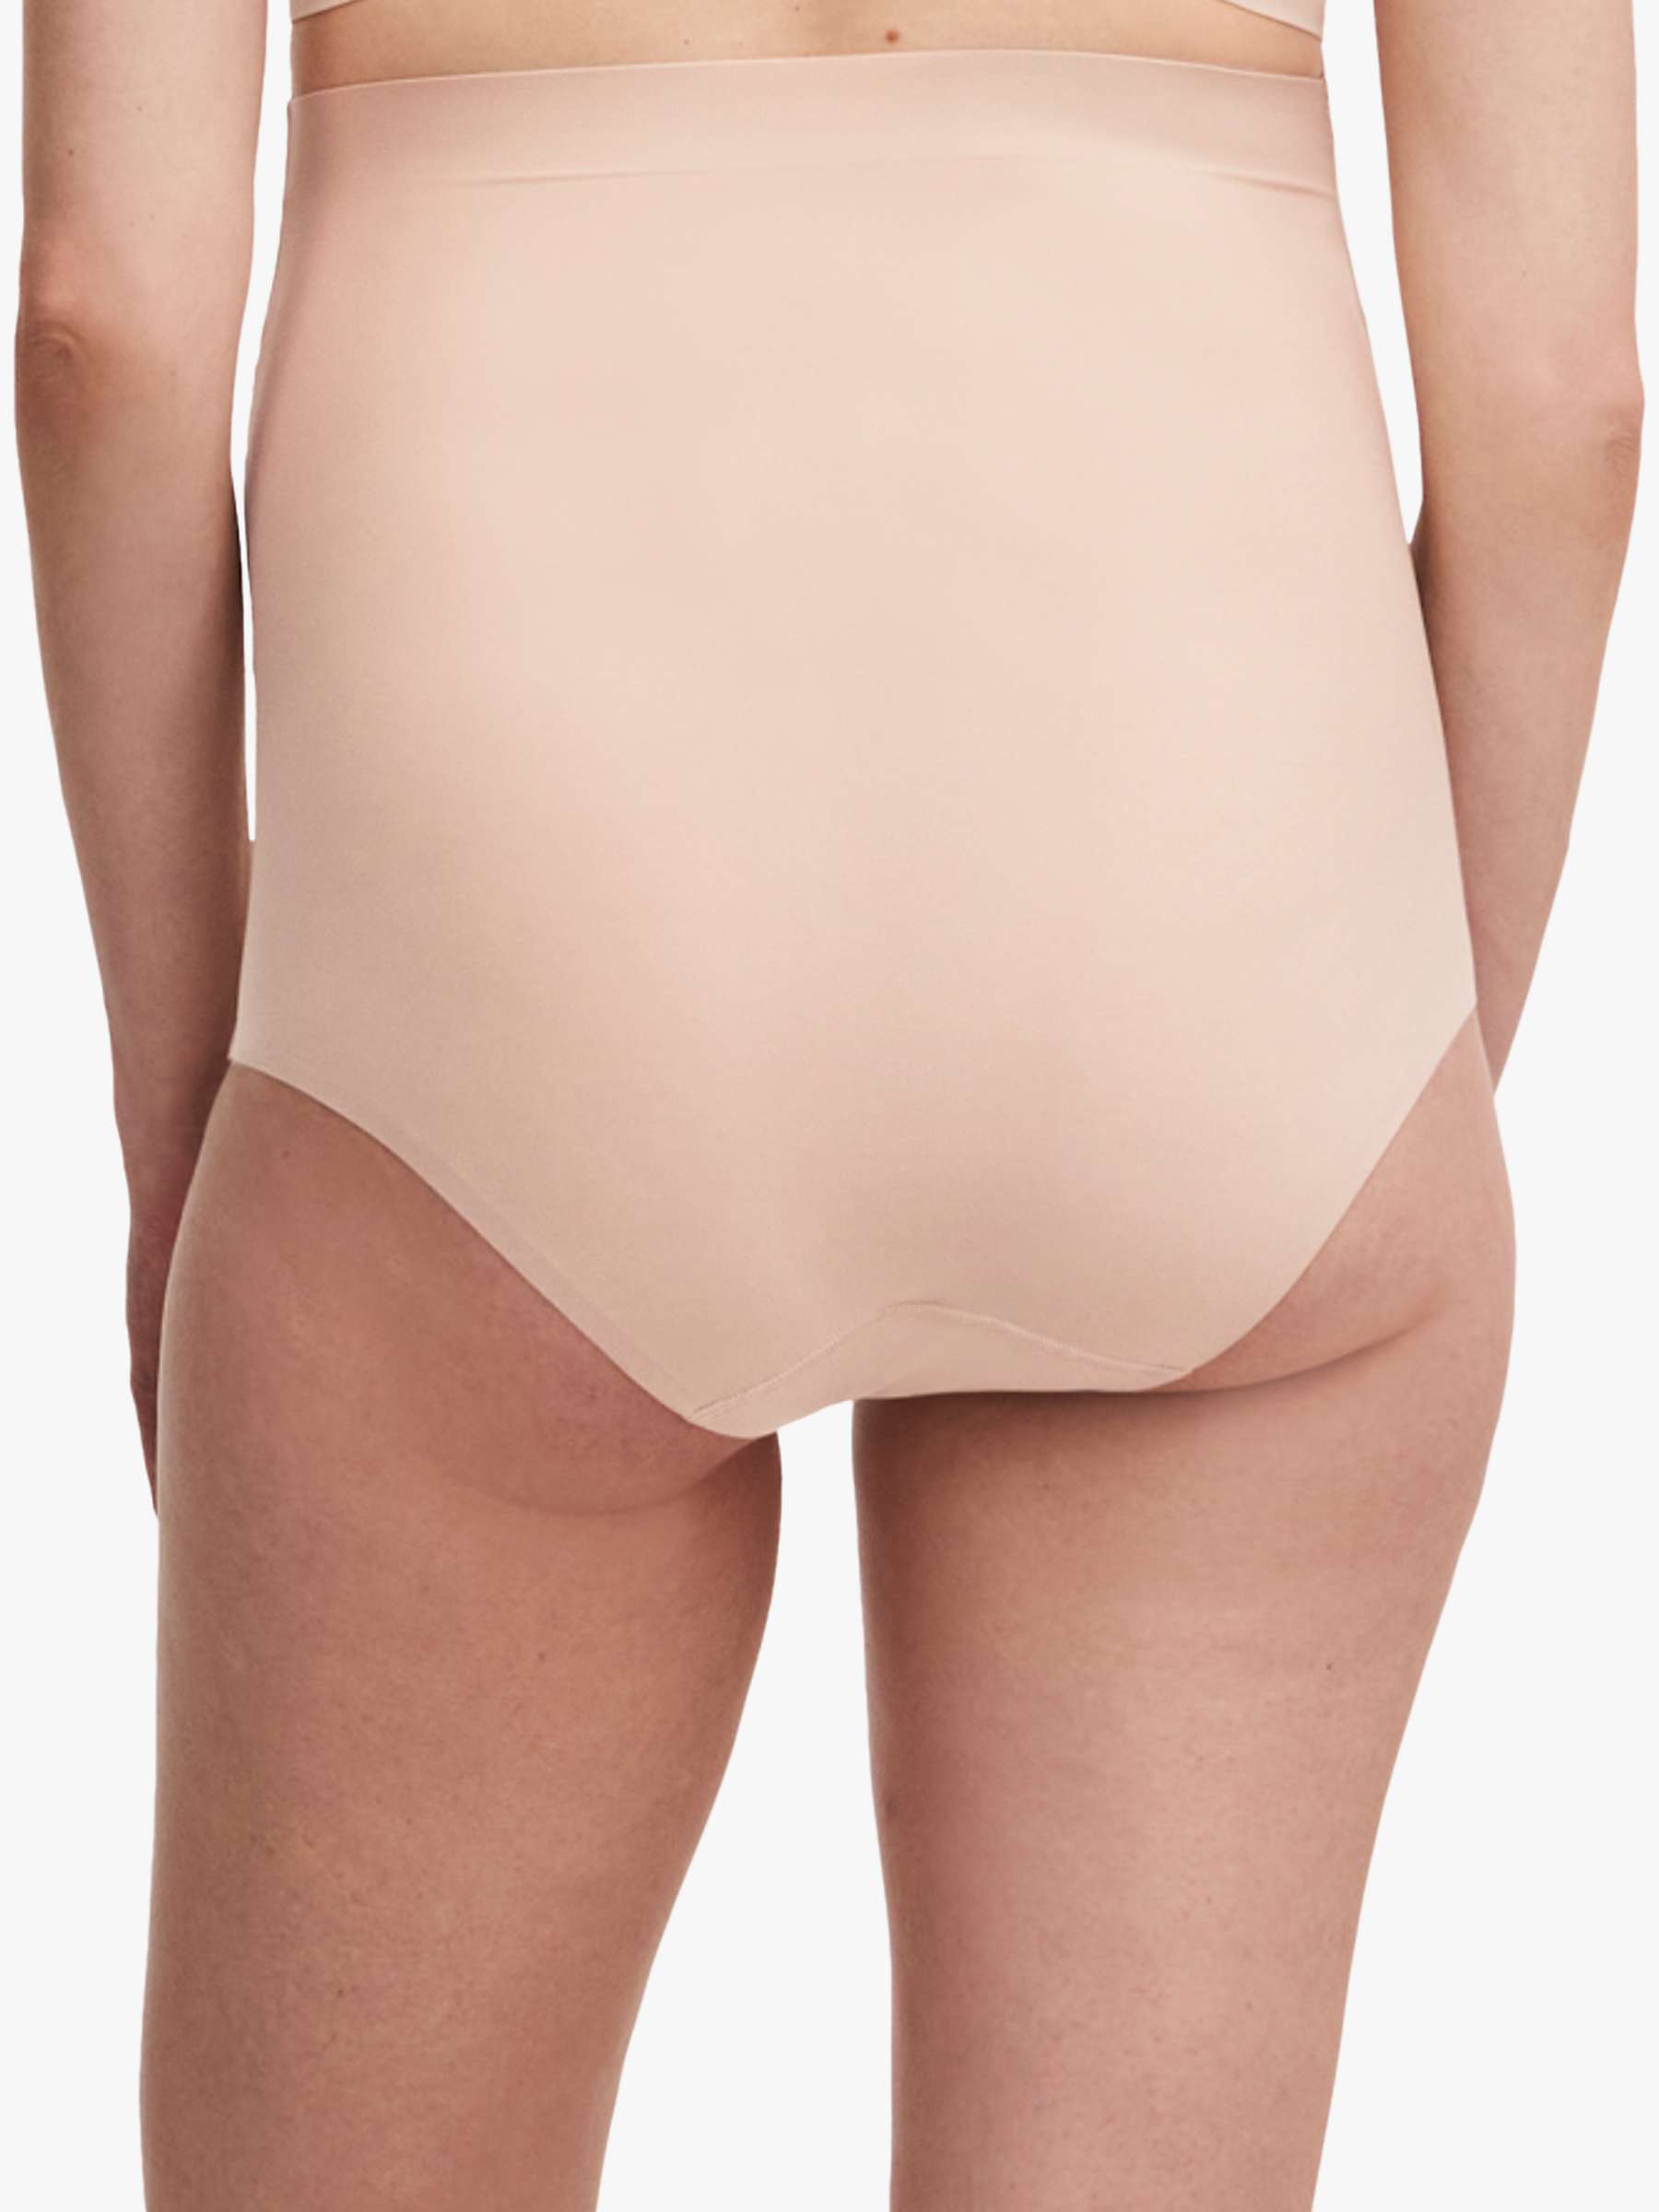 Buy Chantelle Pure Maternity High Waist Knickers Online at johnlewis.com